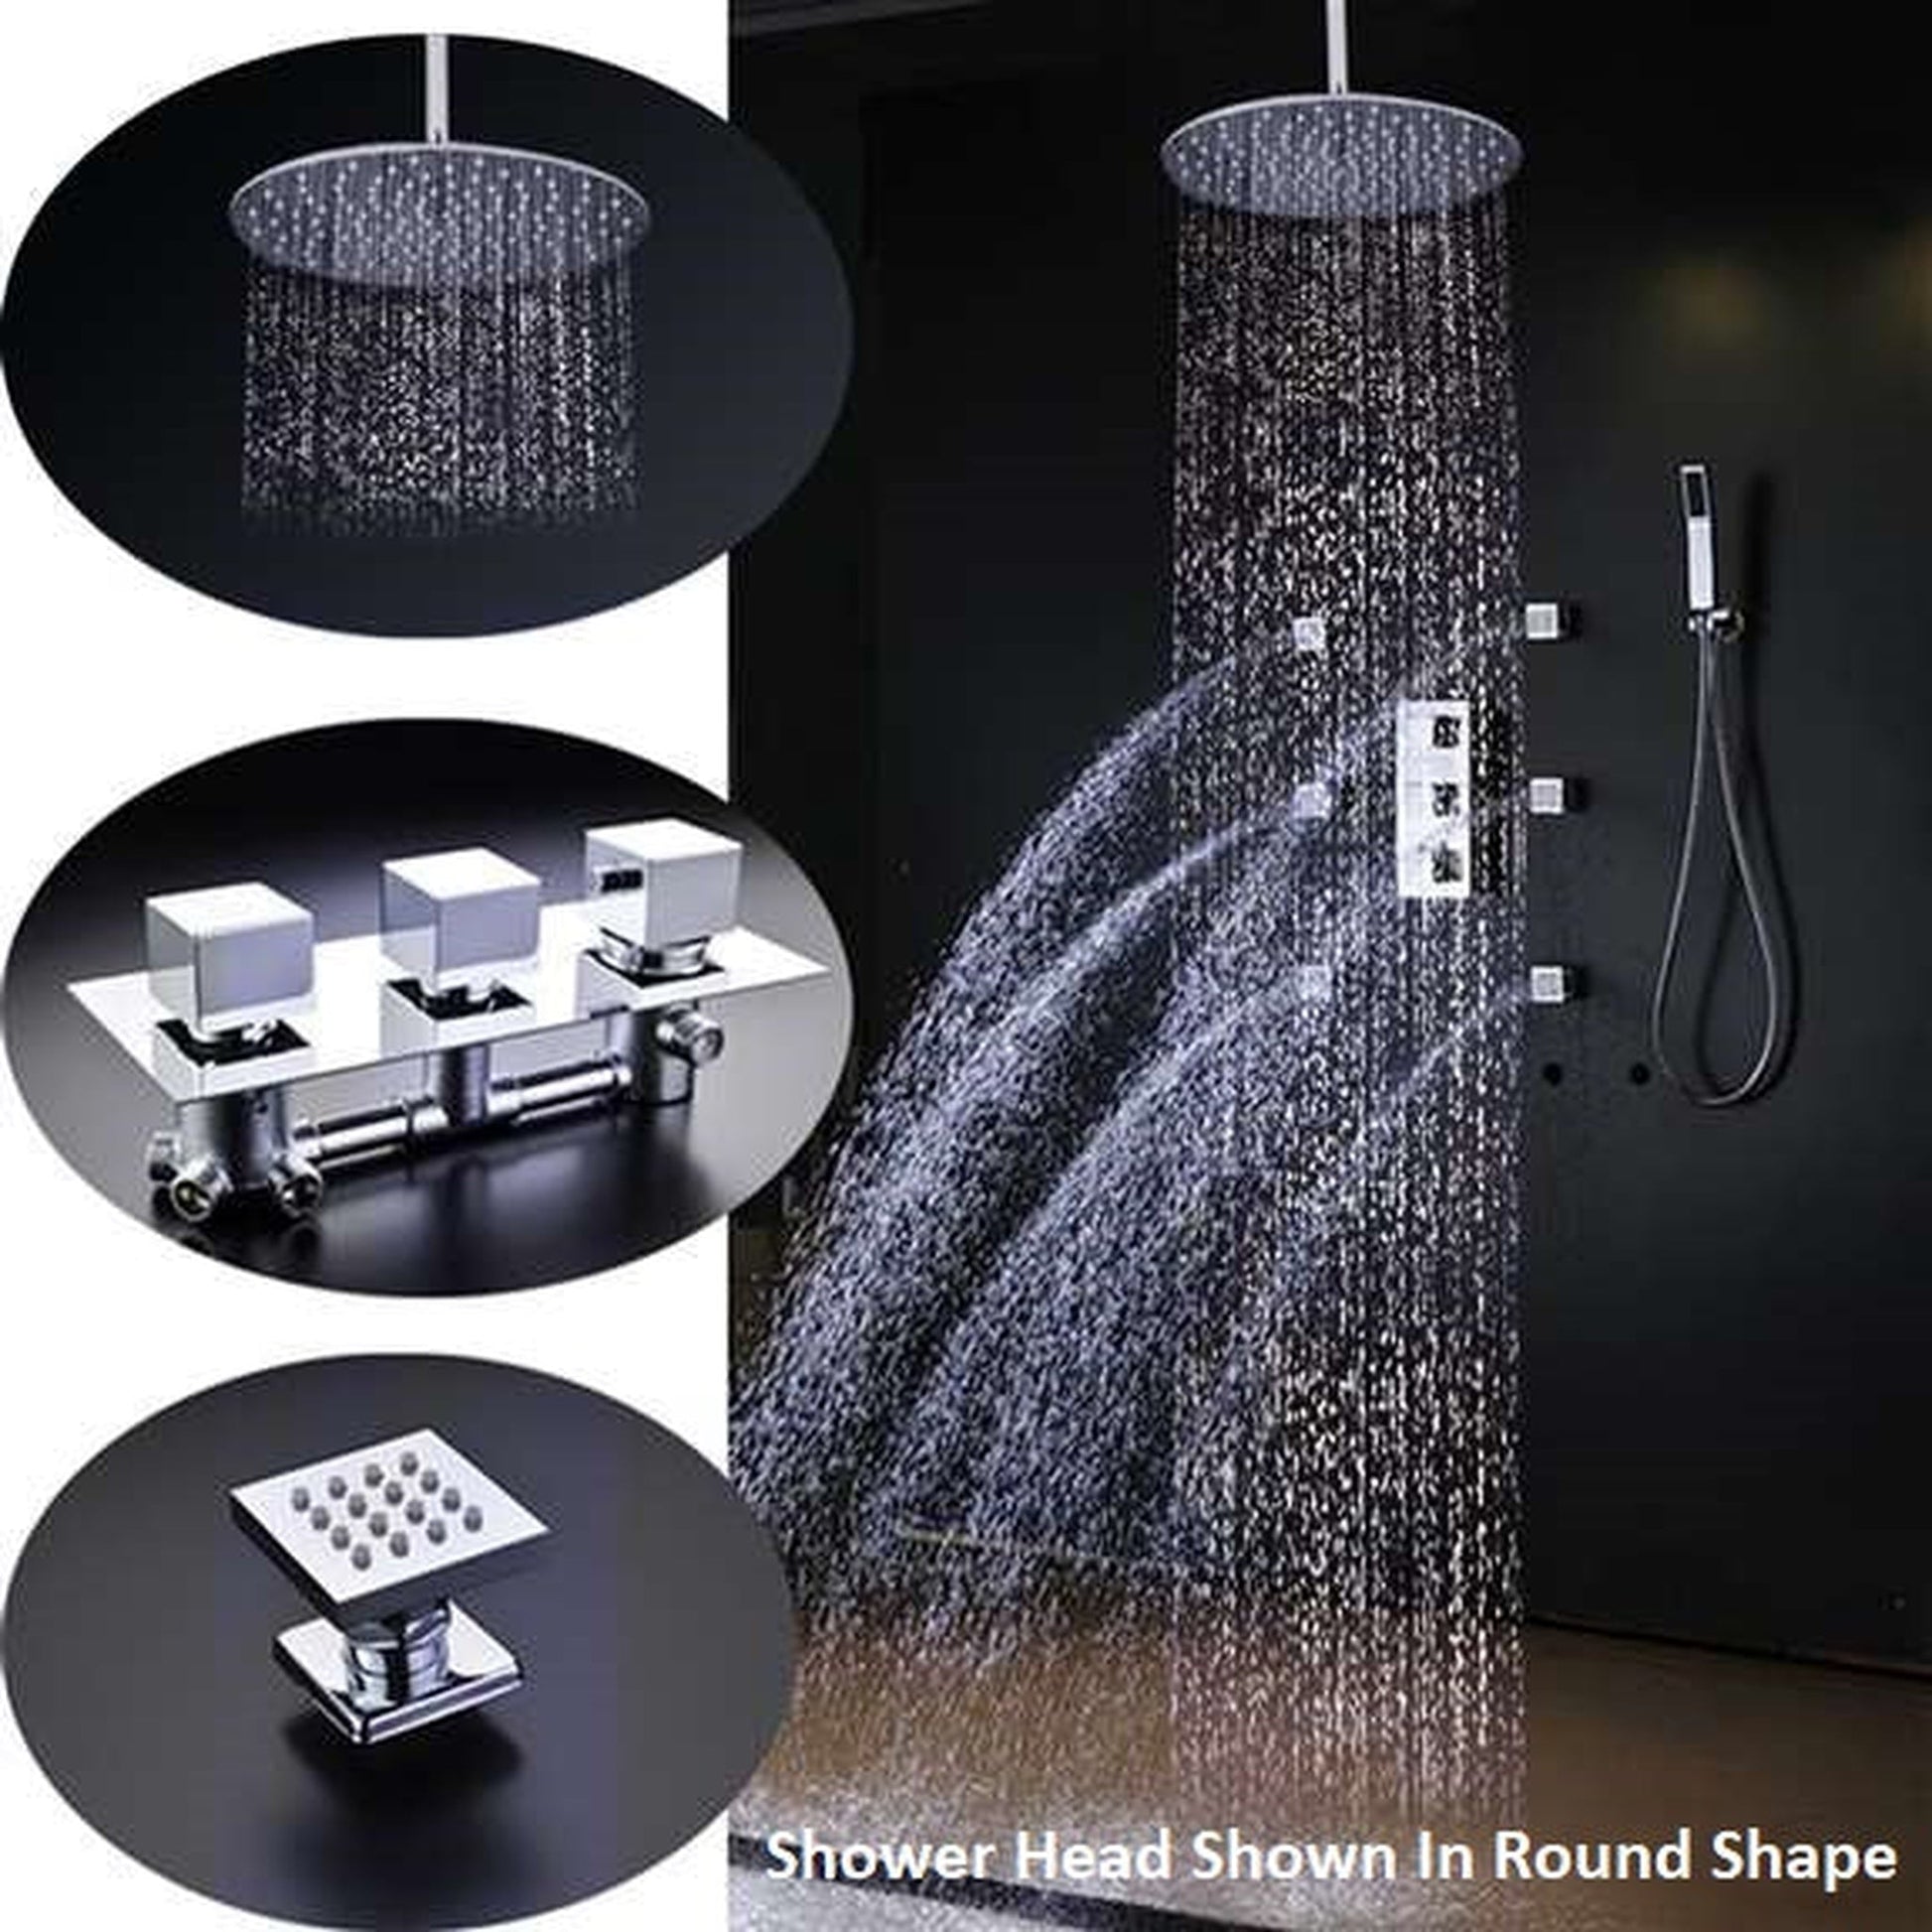 FontanaShowers Atlantic Creative Luxury 12" Large Chrome Square Ceiling Mounted Massage Shower System With Water Powered LED Lights, 6-Jet Body Spray and Hand Shower